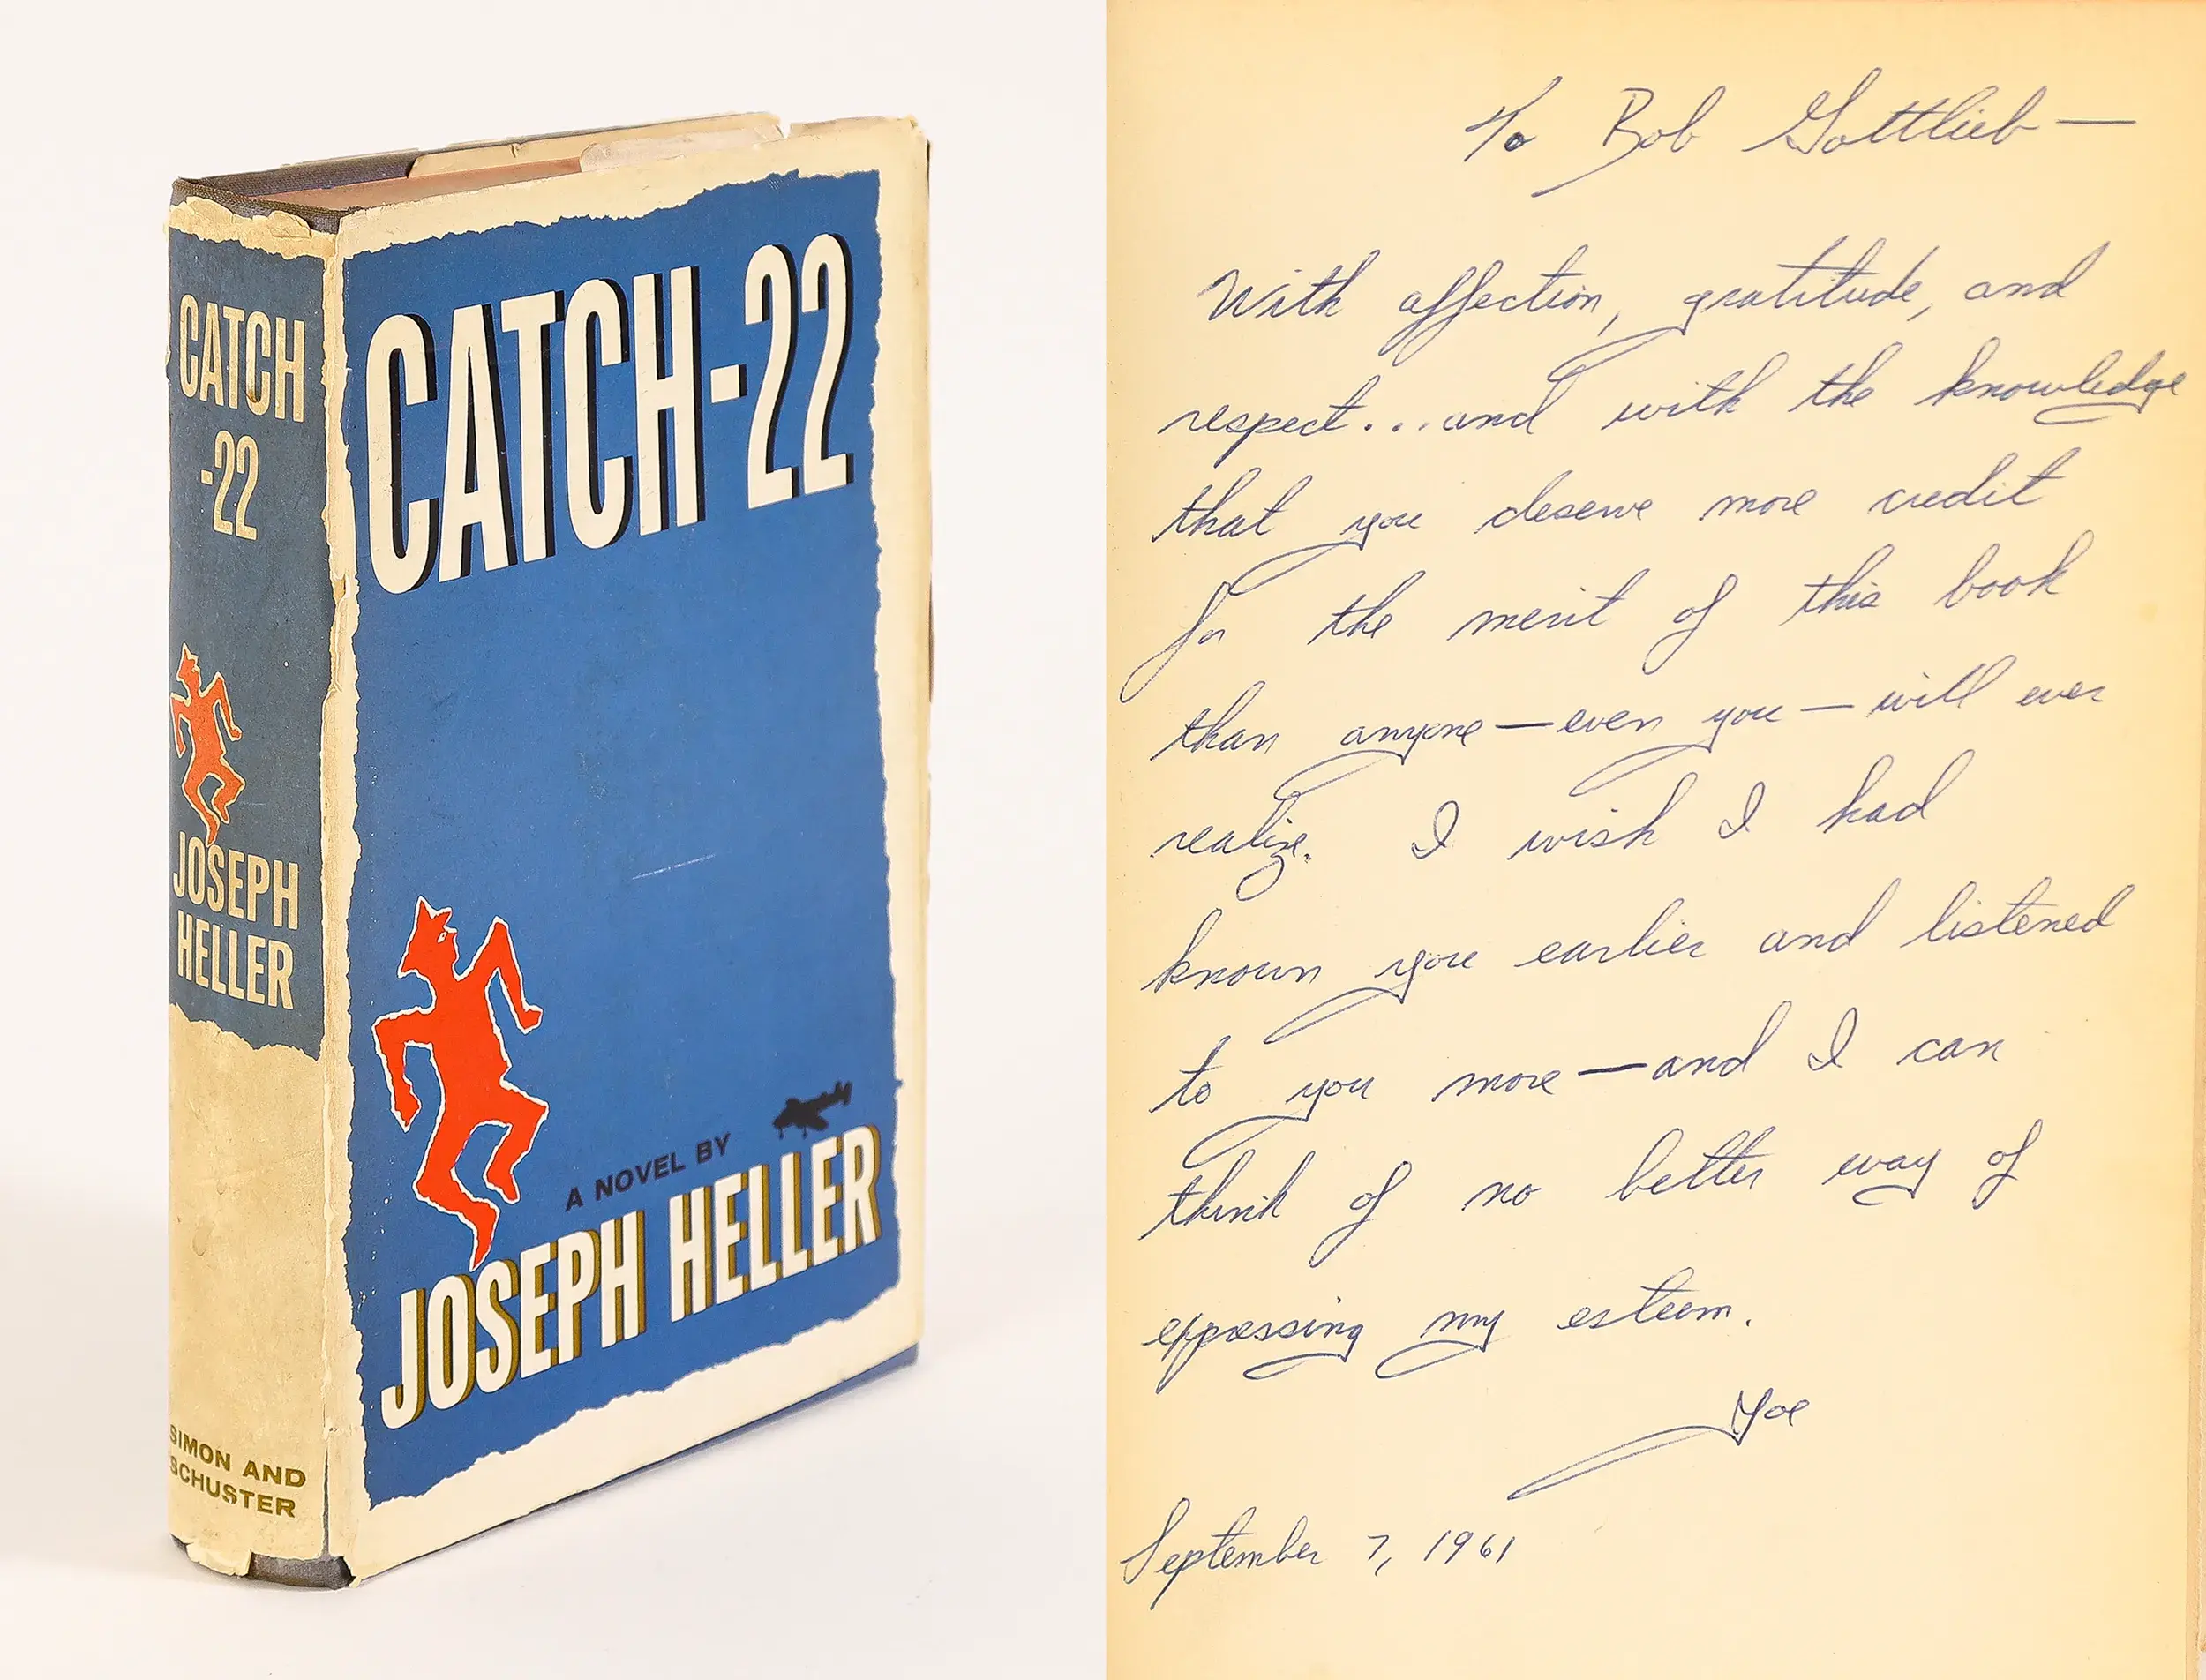 First edition, first printing, first issue dust jacket of Catch-22, bearing a personalized inscription (Simon & Schuster 1961) (Estimate $20,000-30,000)
